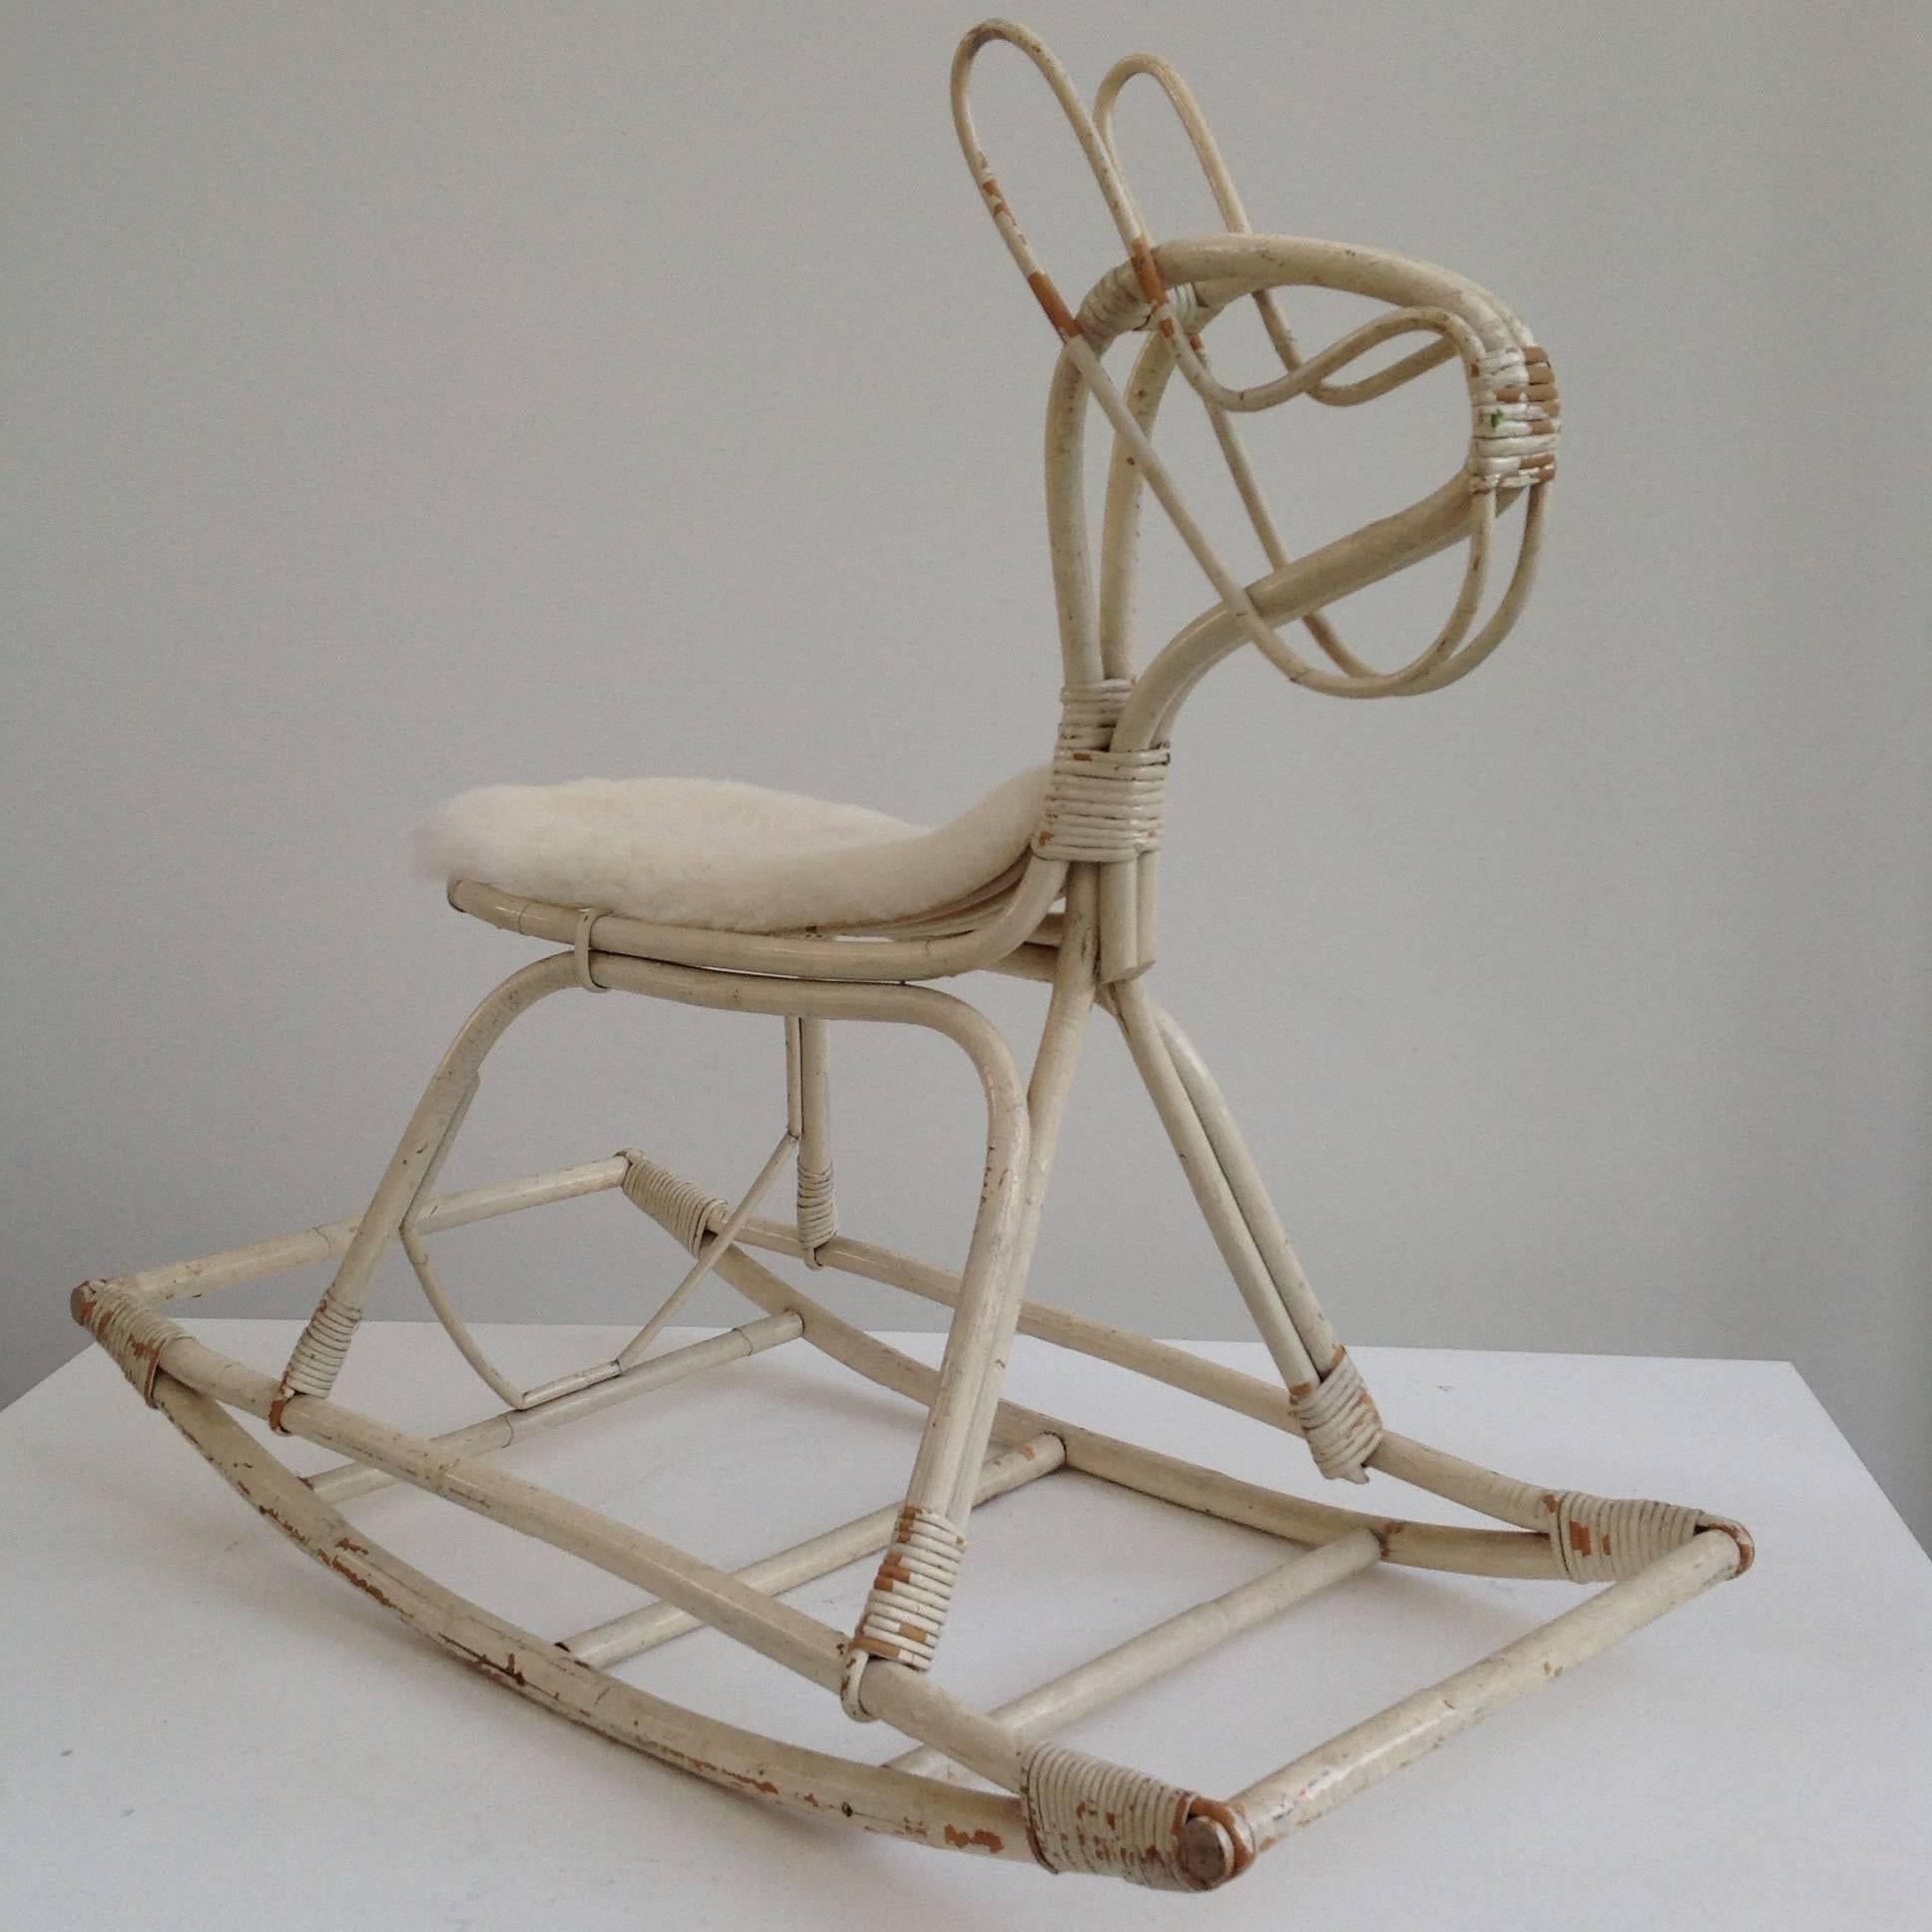 Painted Rare Bamboo Rocking Horse by Dirk van Sliedrecht for Rohé, 1950s